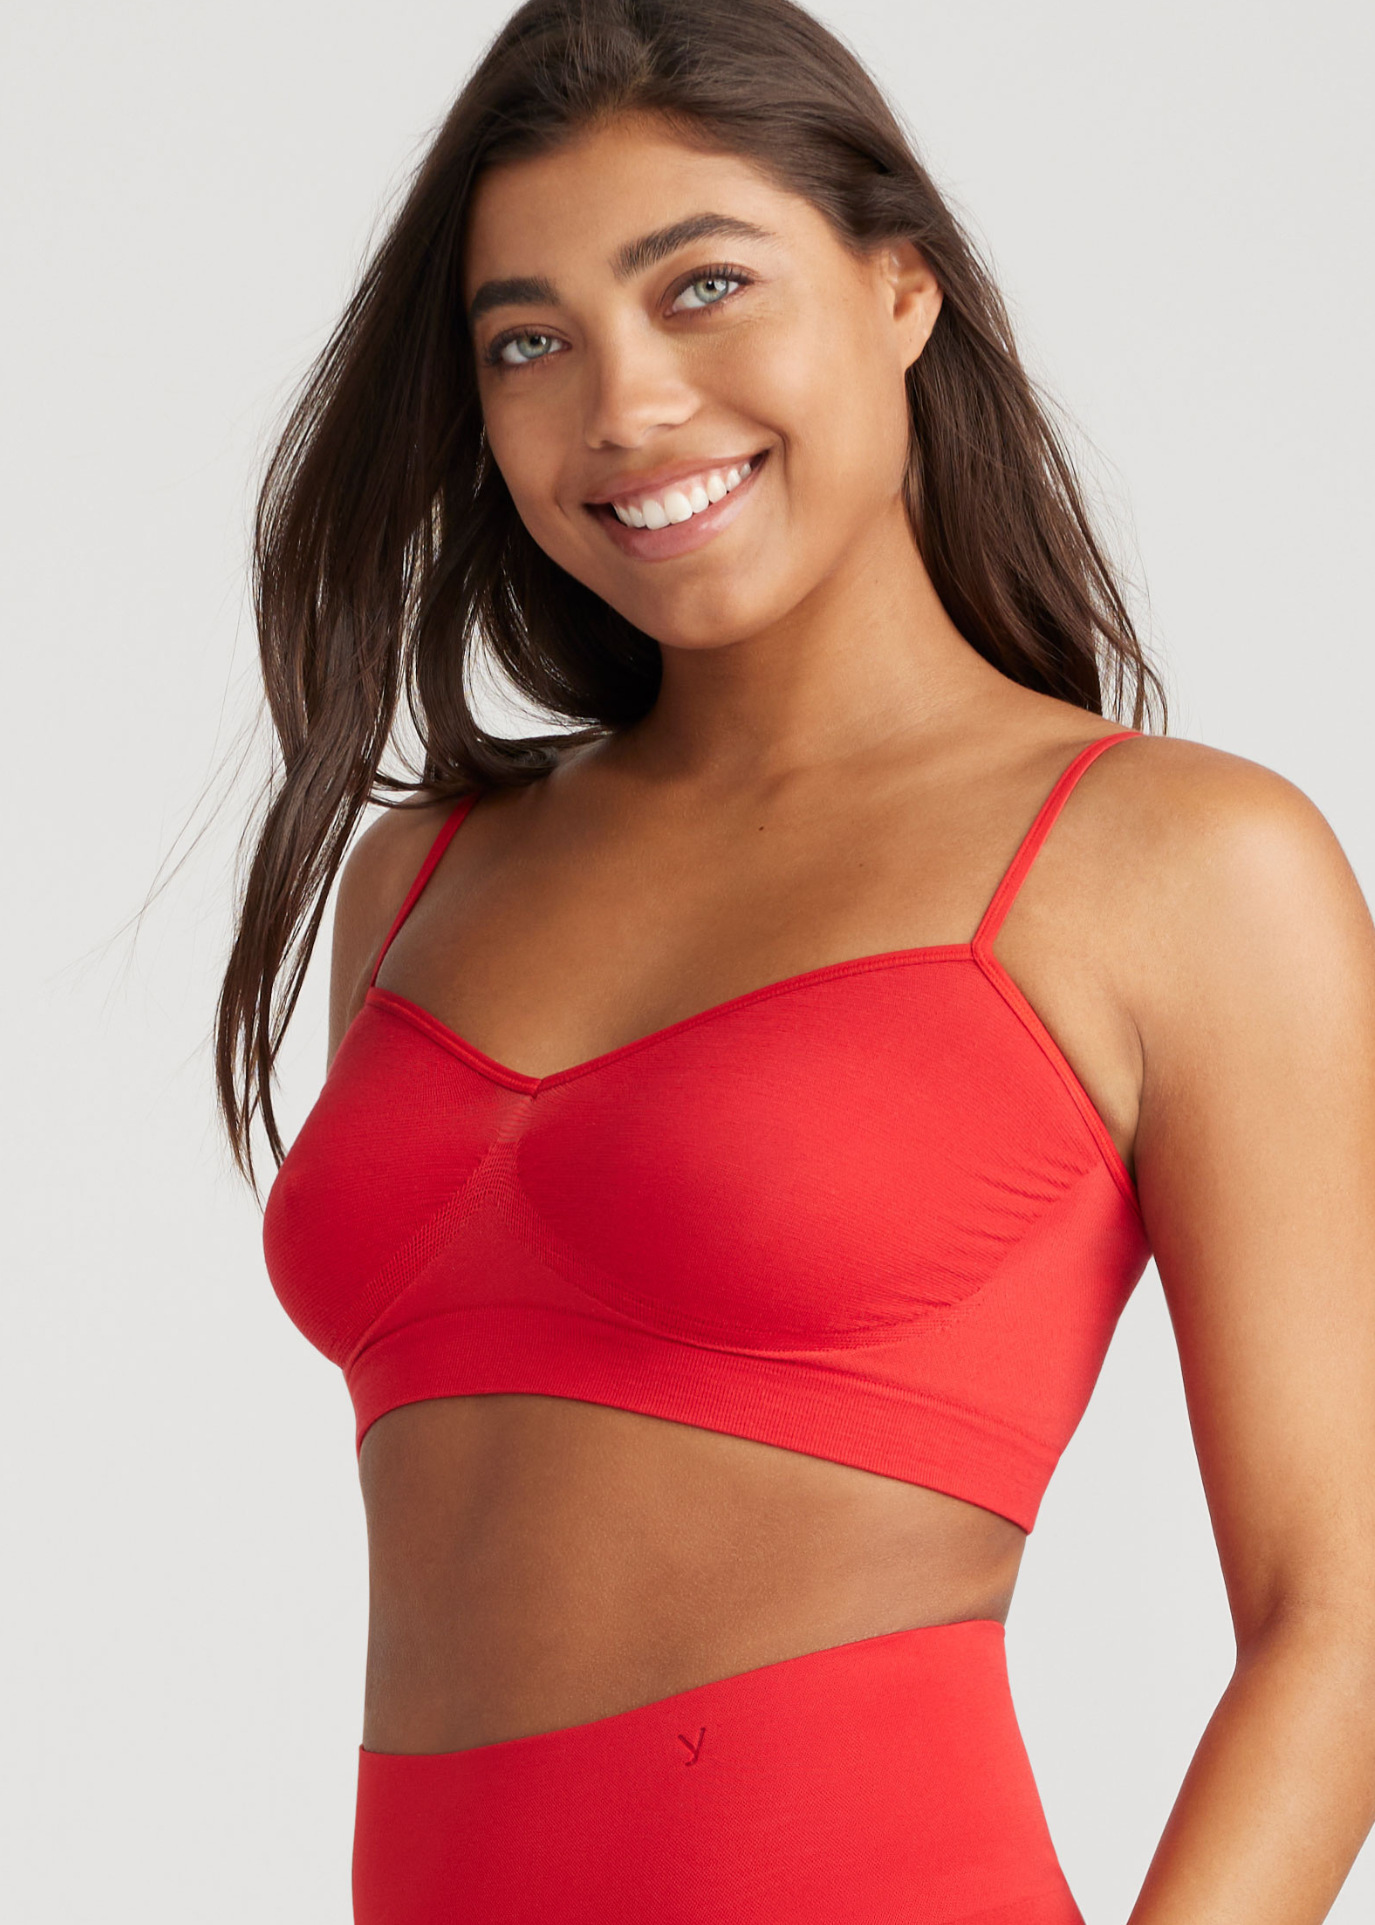 Yummie - Emmie Bralette - More Colours – About the Bra